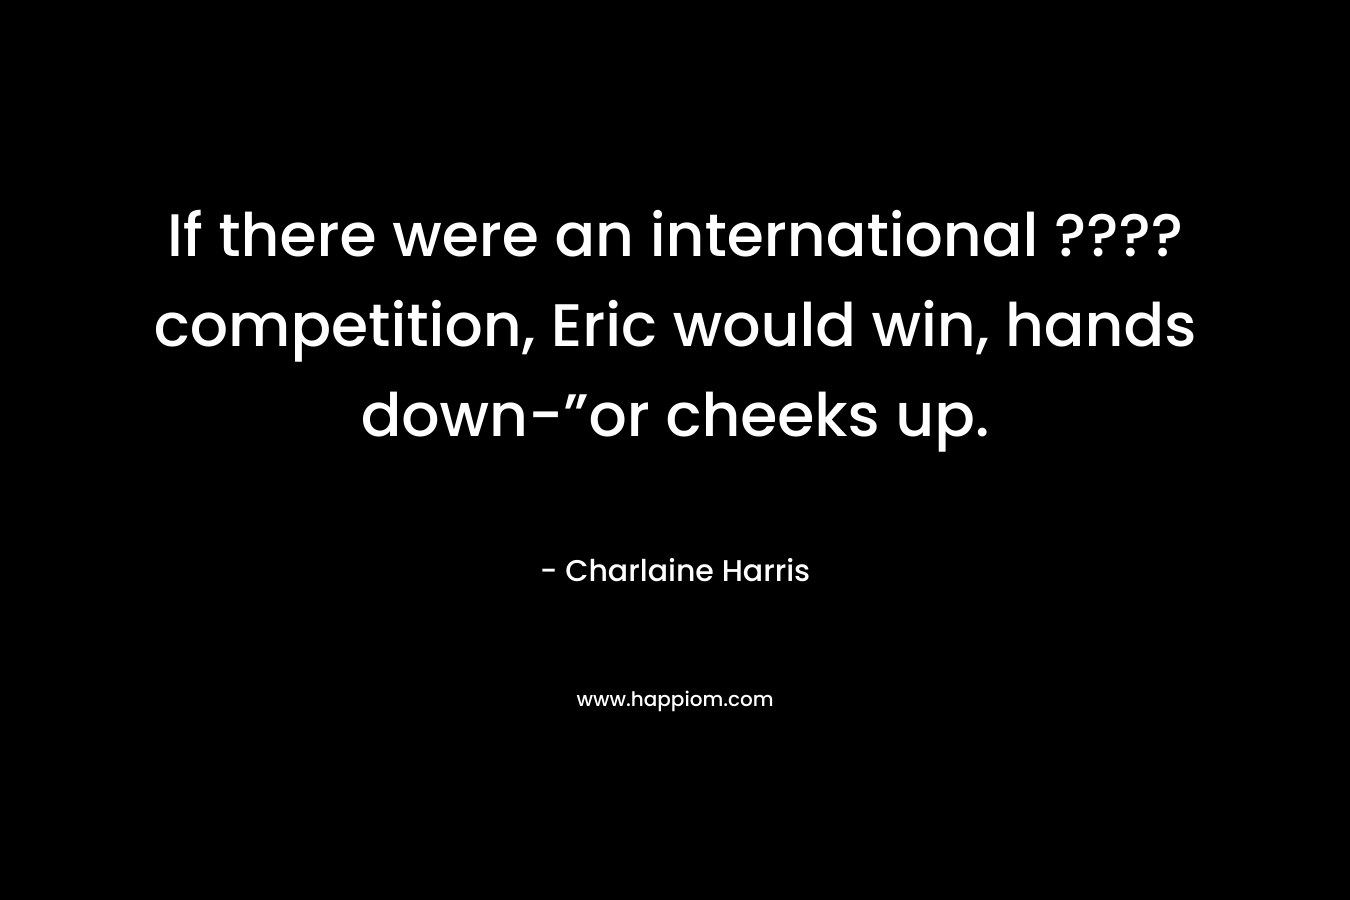 If there were an international ???? competition, Eric would win, hands down-”or cheeks up.